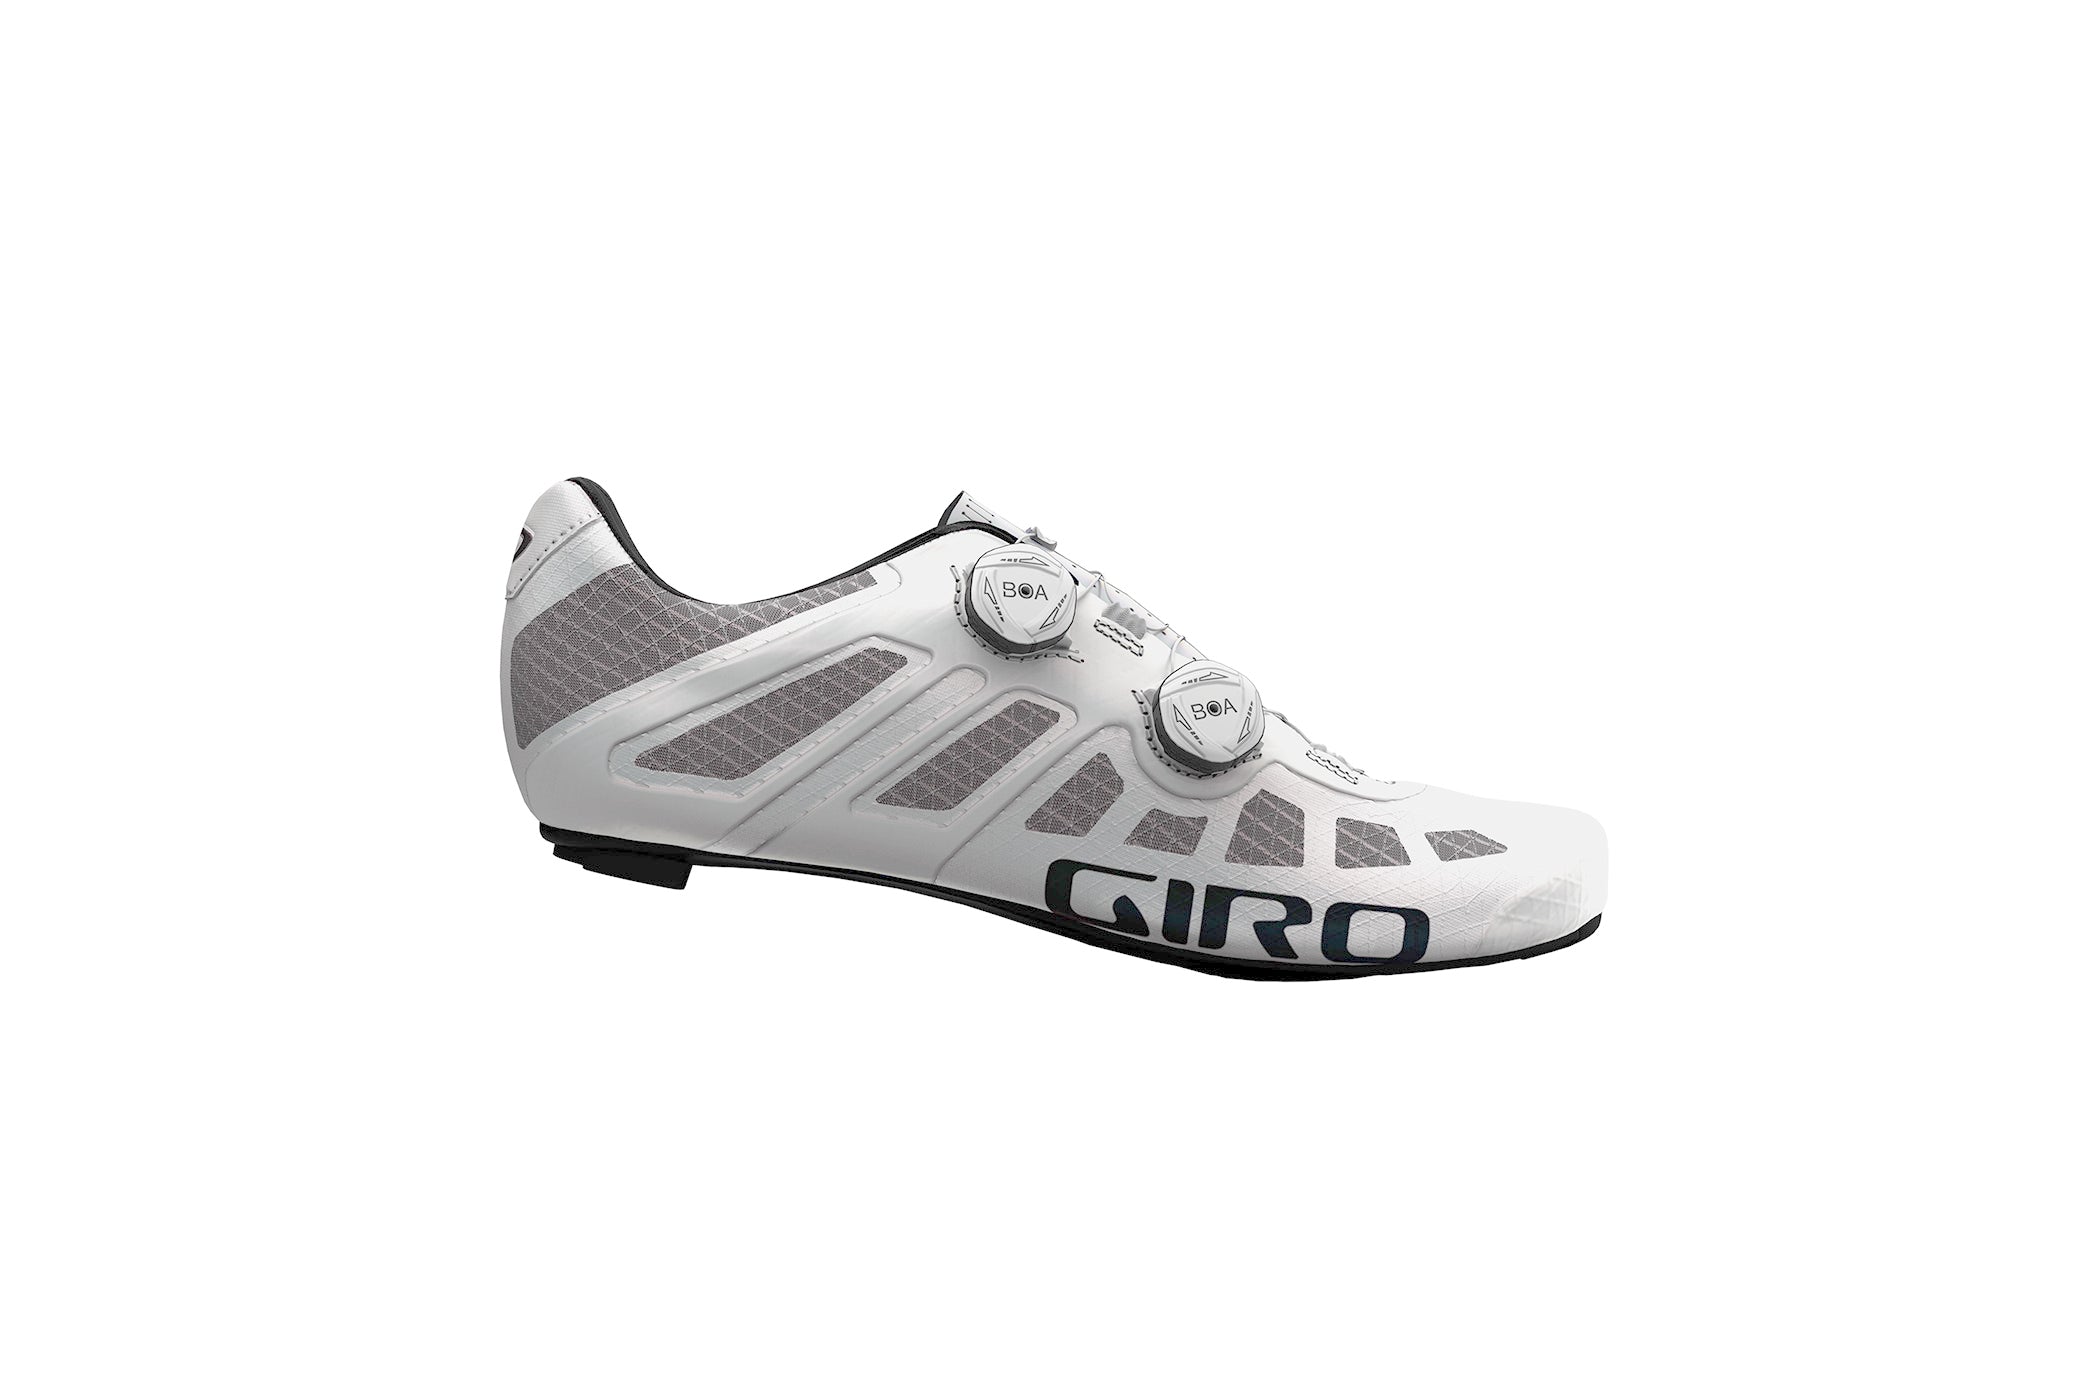 Road Bike/Cycling Shoes For Sale The Pros Closet